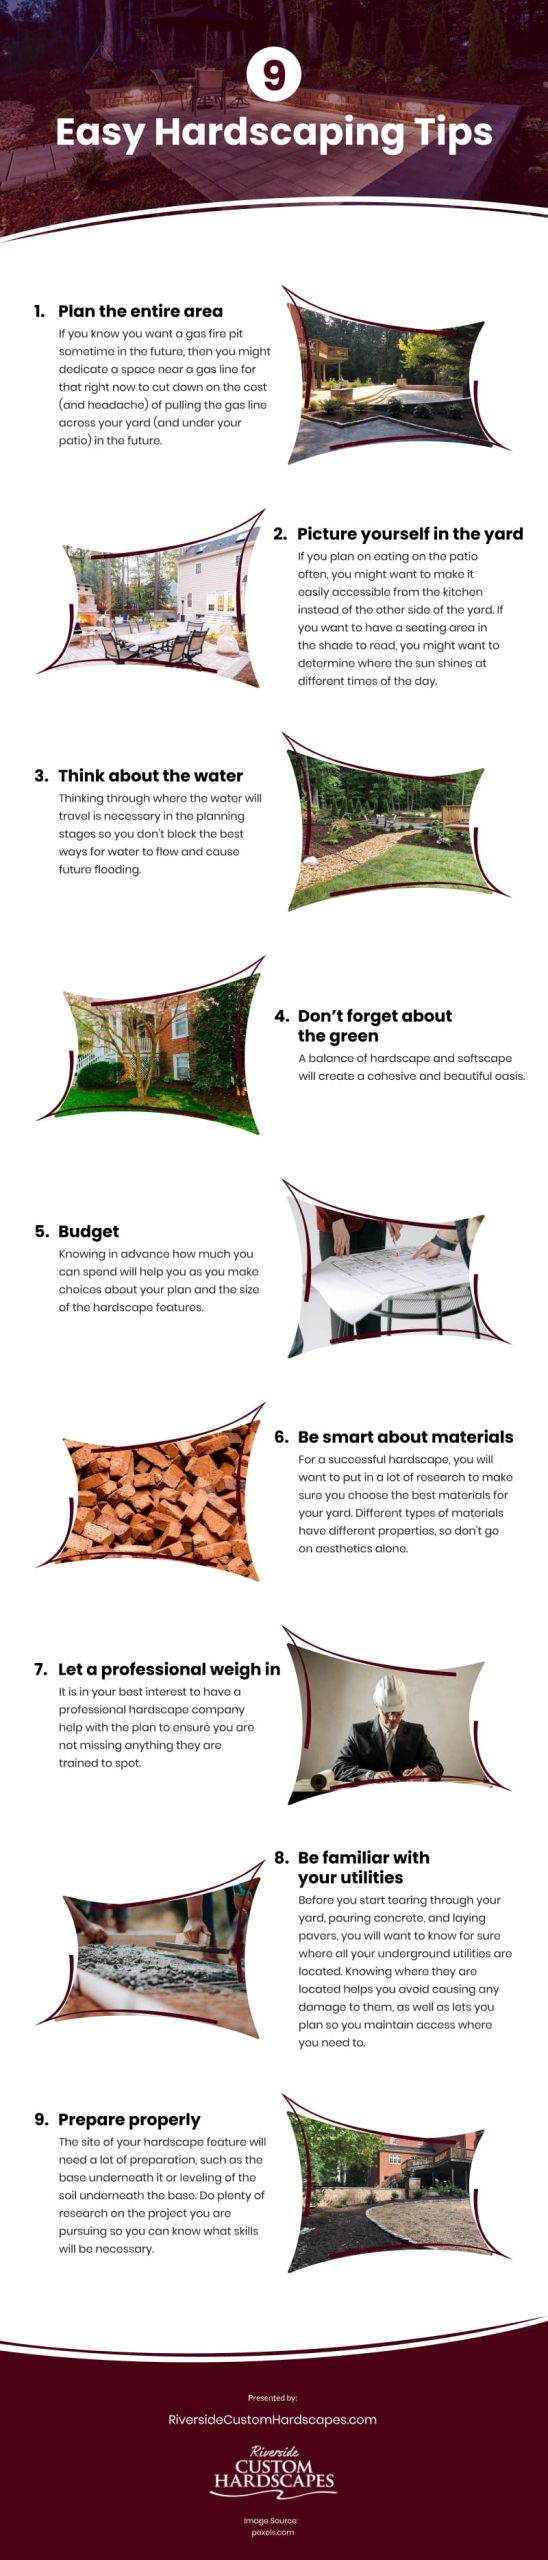 9 Easy Hardscaping Tips Infographic